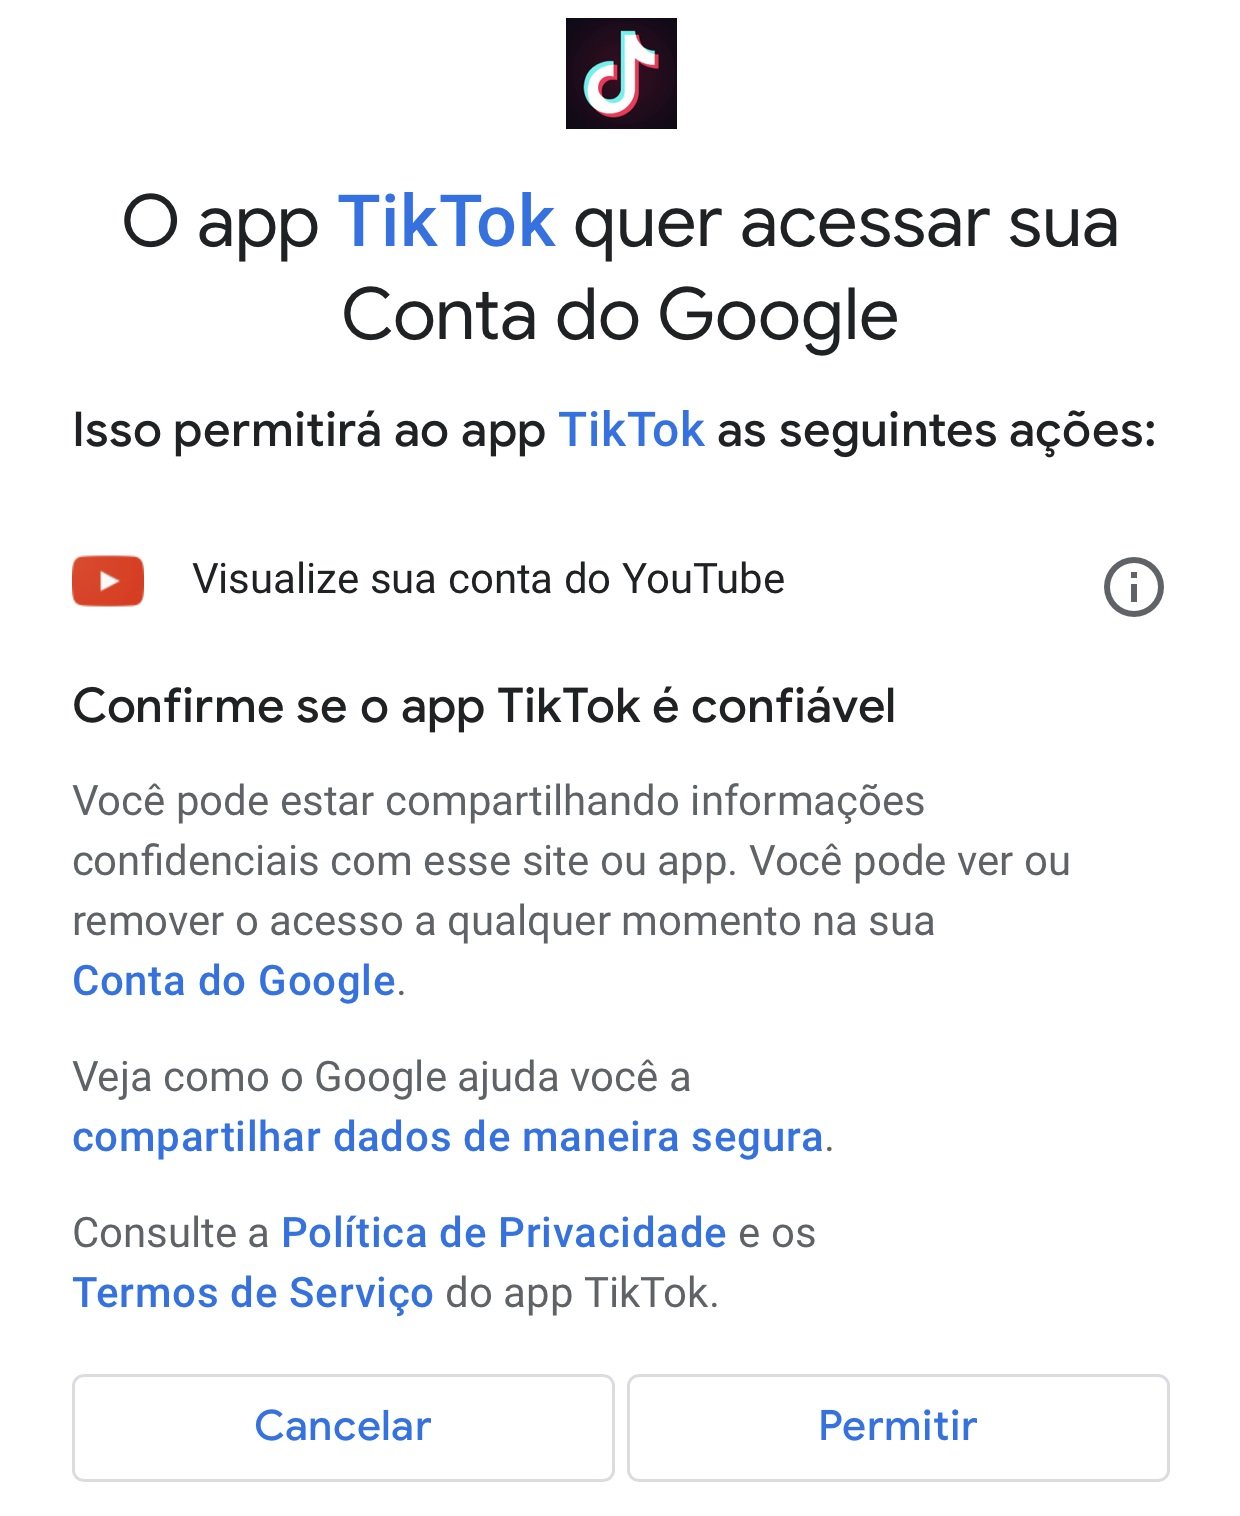 You must authorize TikTok in your Google account for the link to be created to your YouTube channel.